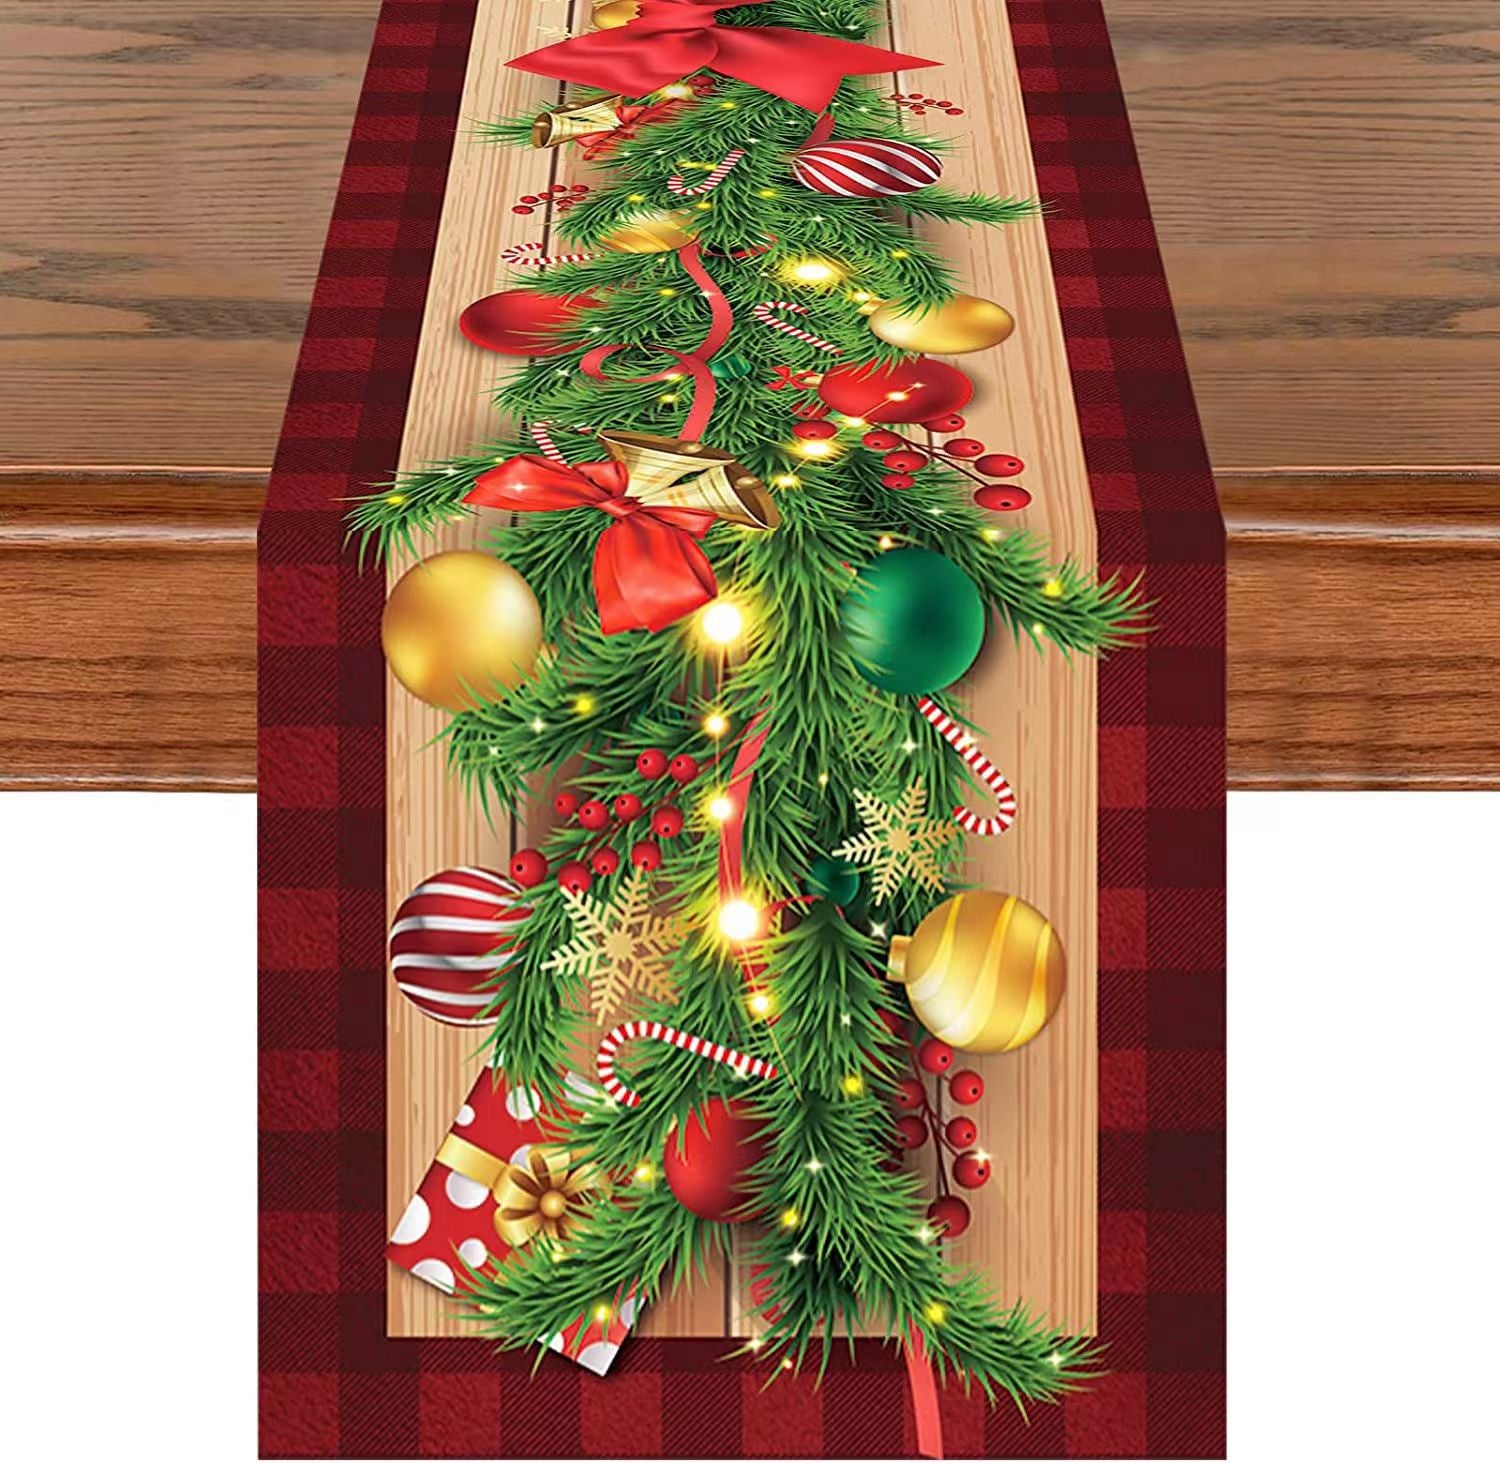 Linen Table Runner Christmas Home Dining Roomliving Room Holiday Decoration Tablecloth